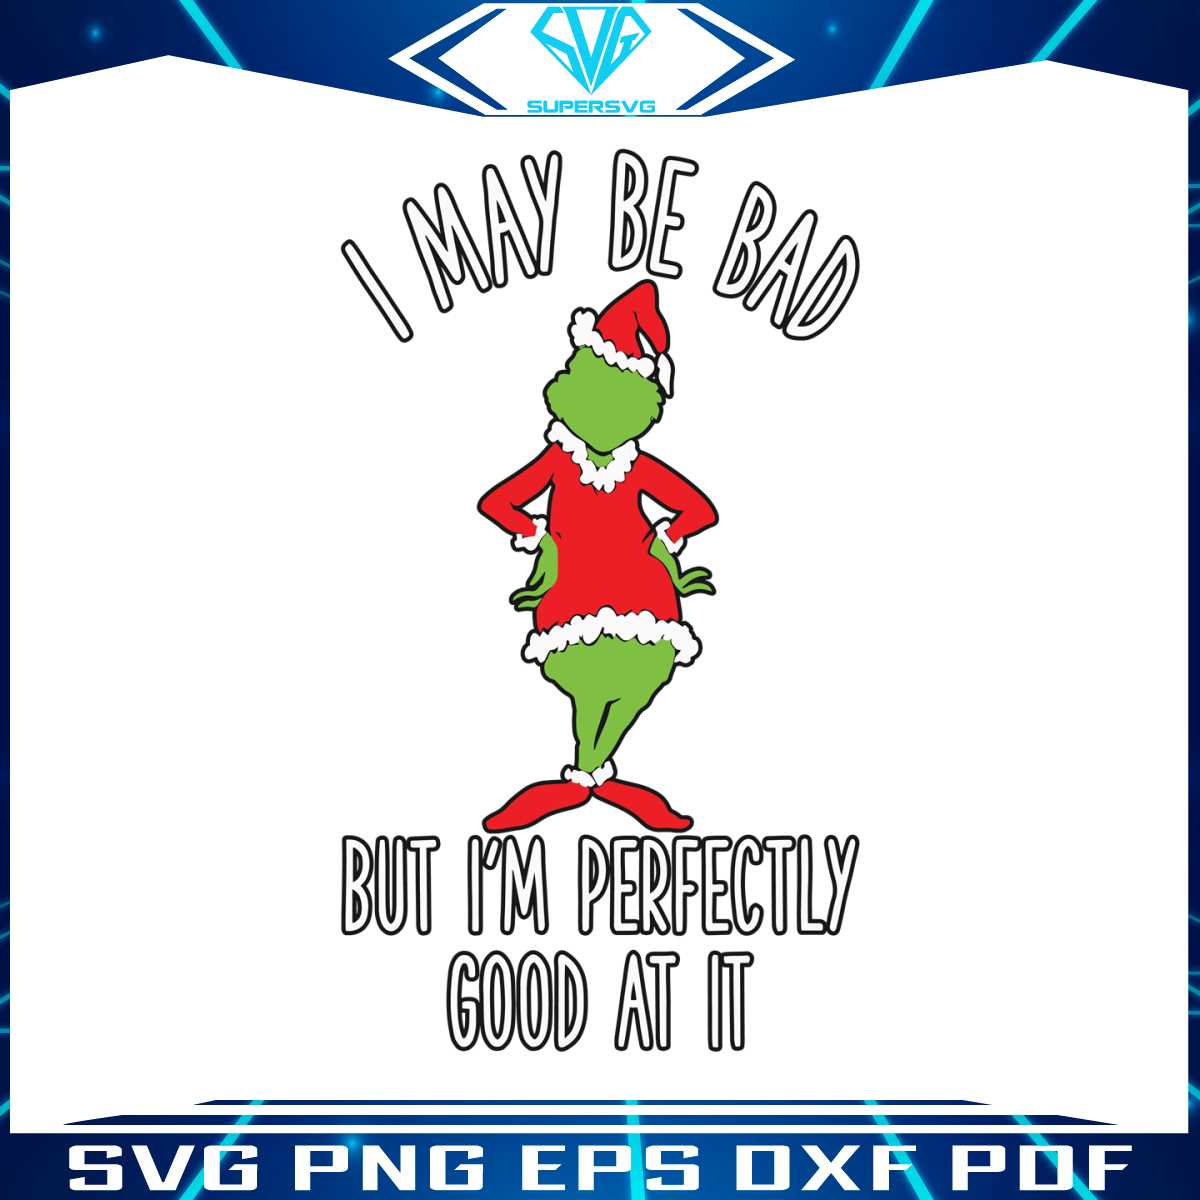 i-may-be-bad-but-im-perfectly-good-at-it-grinch-parody-svg